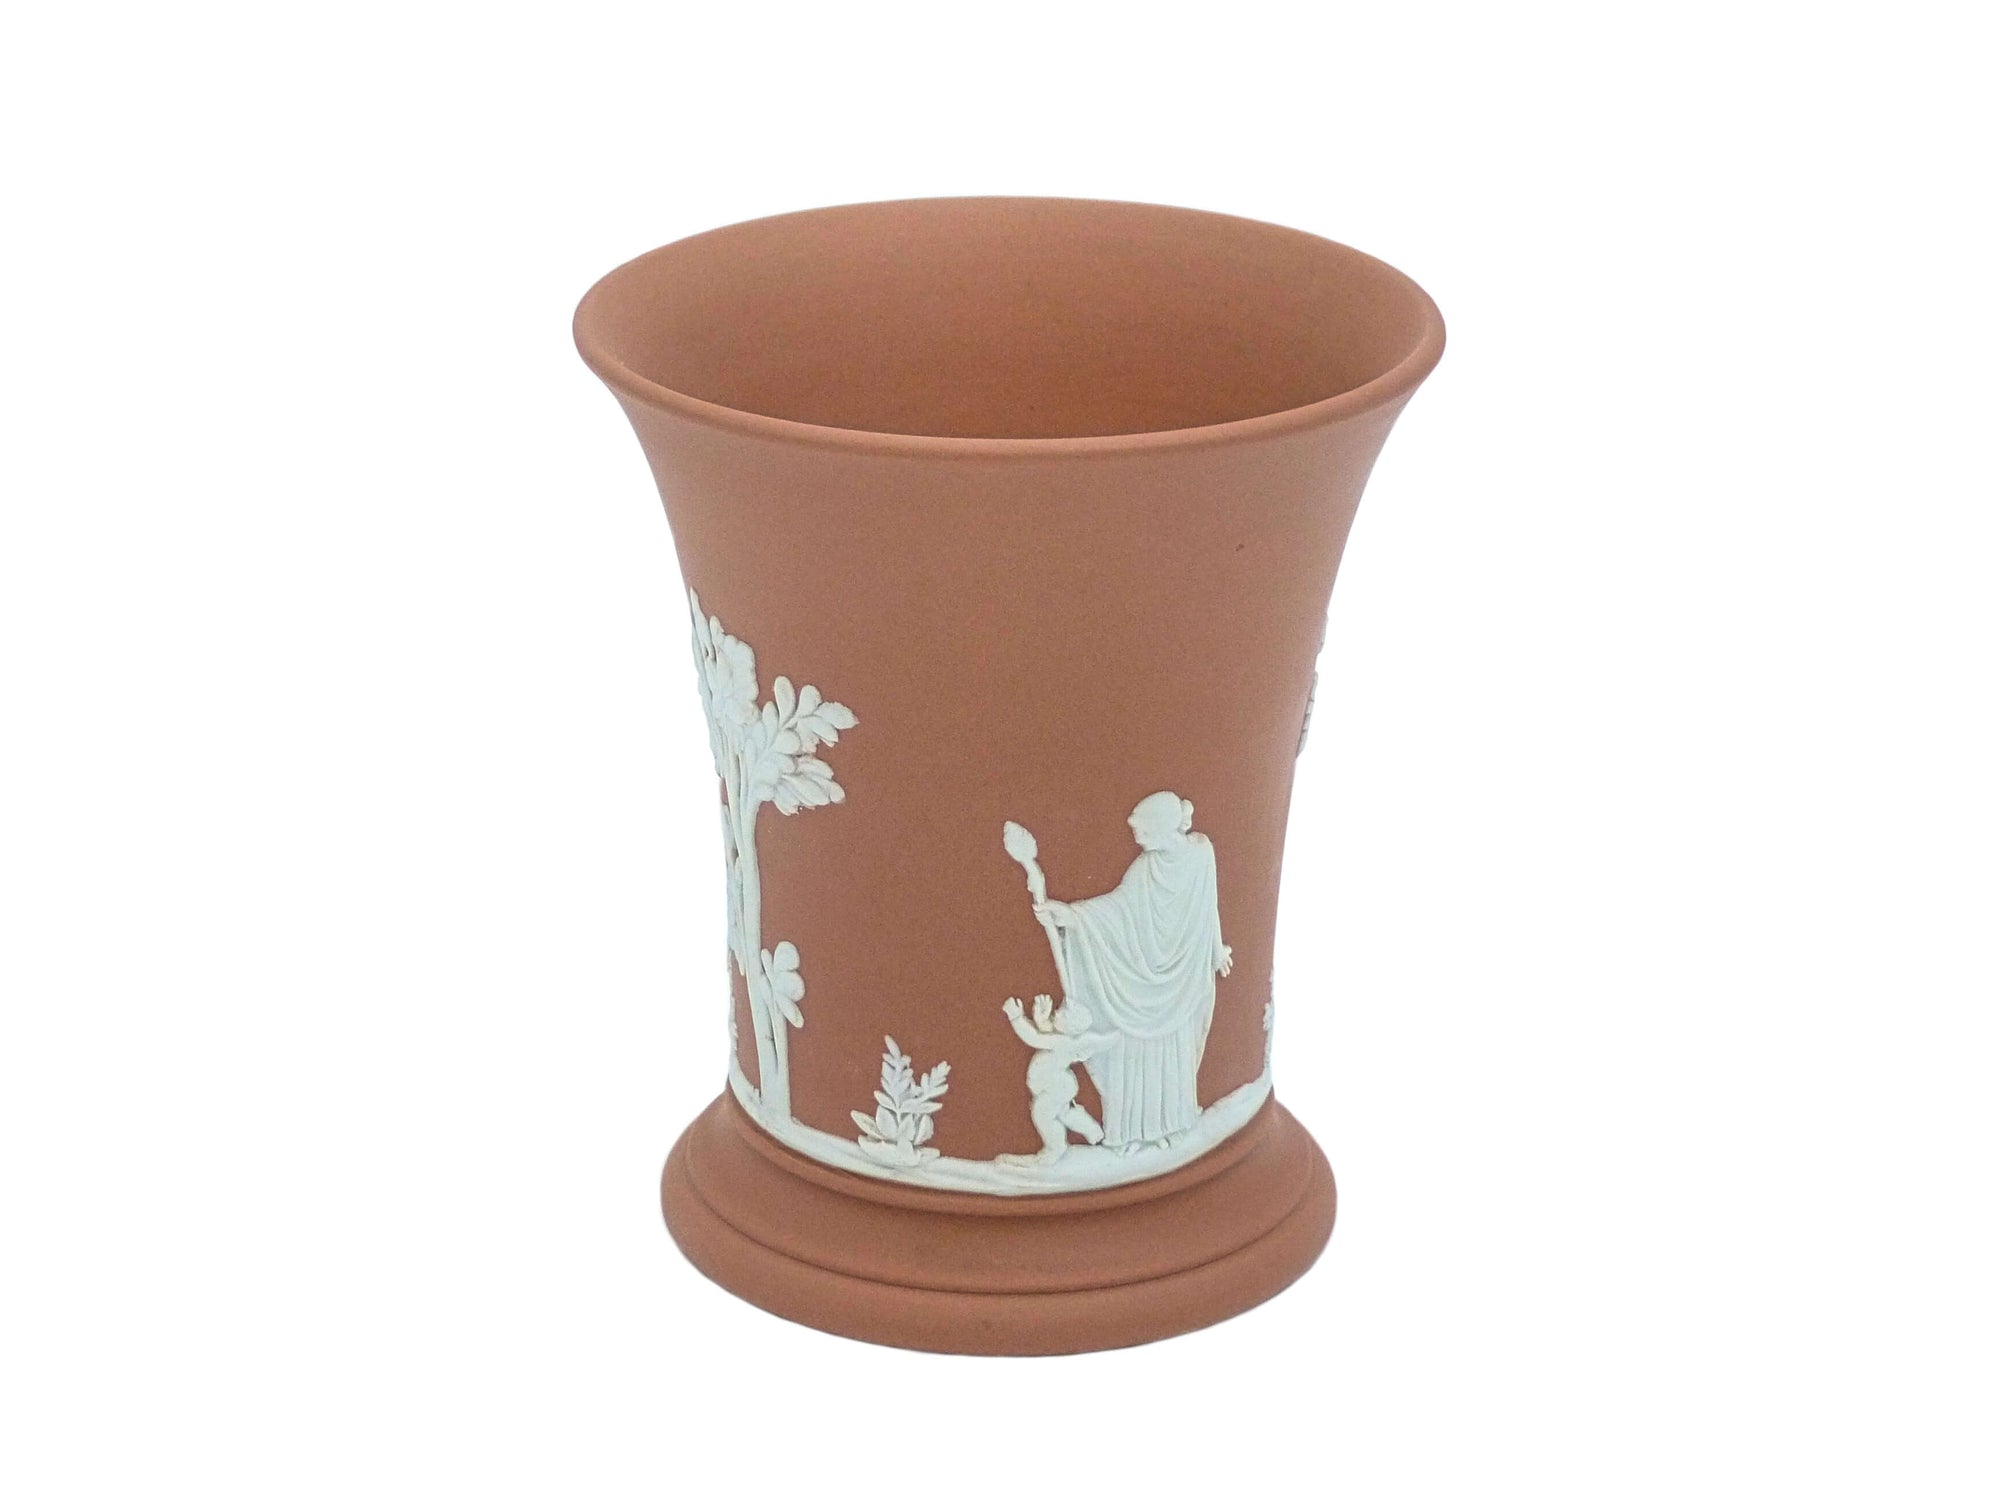 A small terracotta Wedgwood jasperware vase with white neoclassical designs around the body.